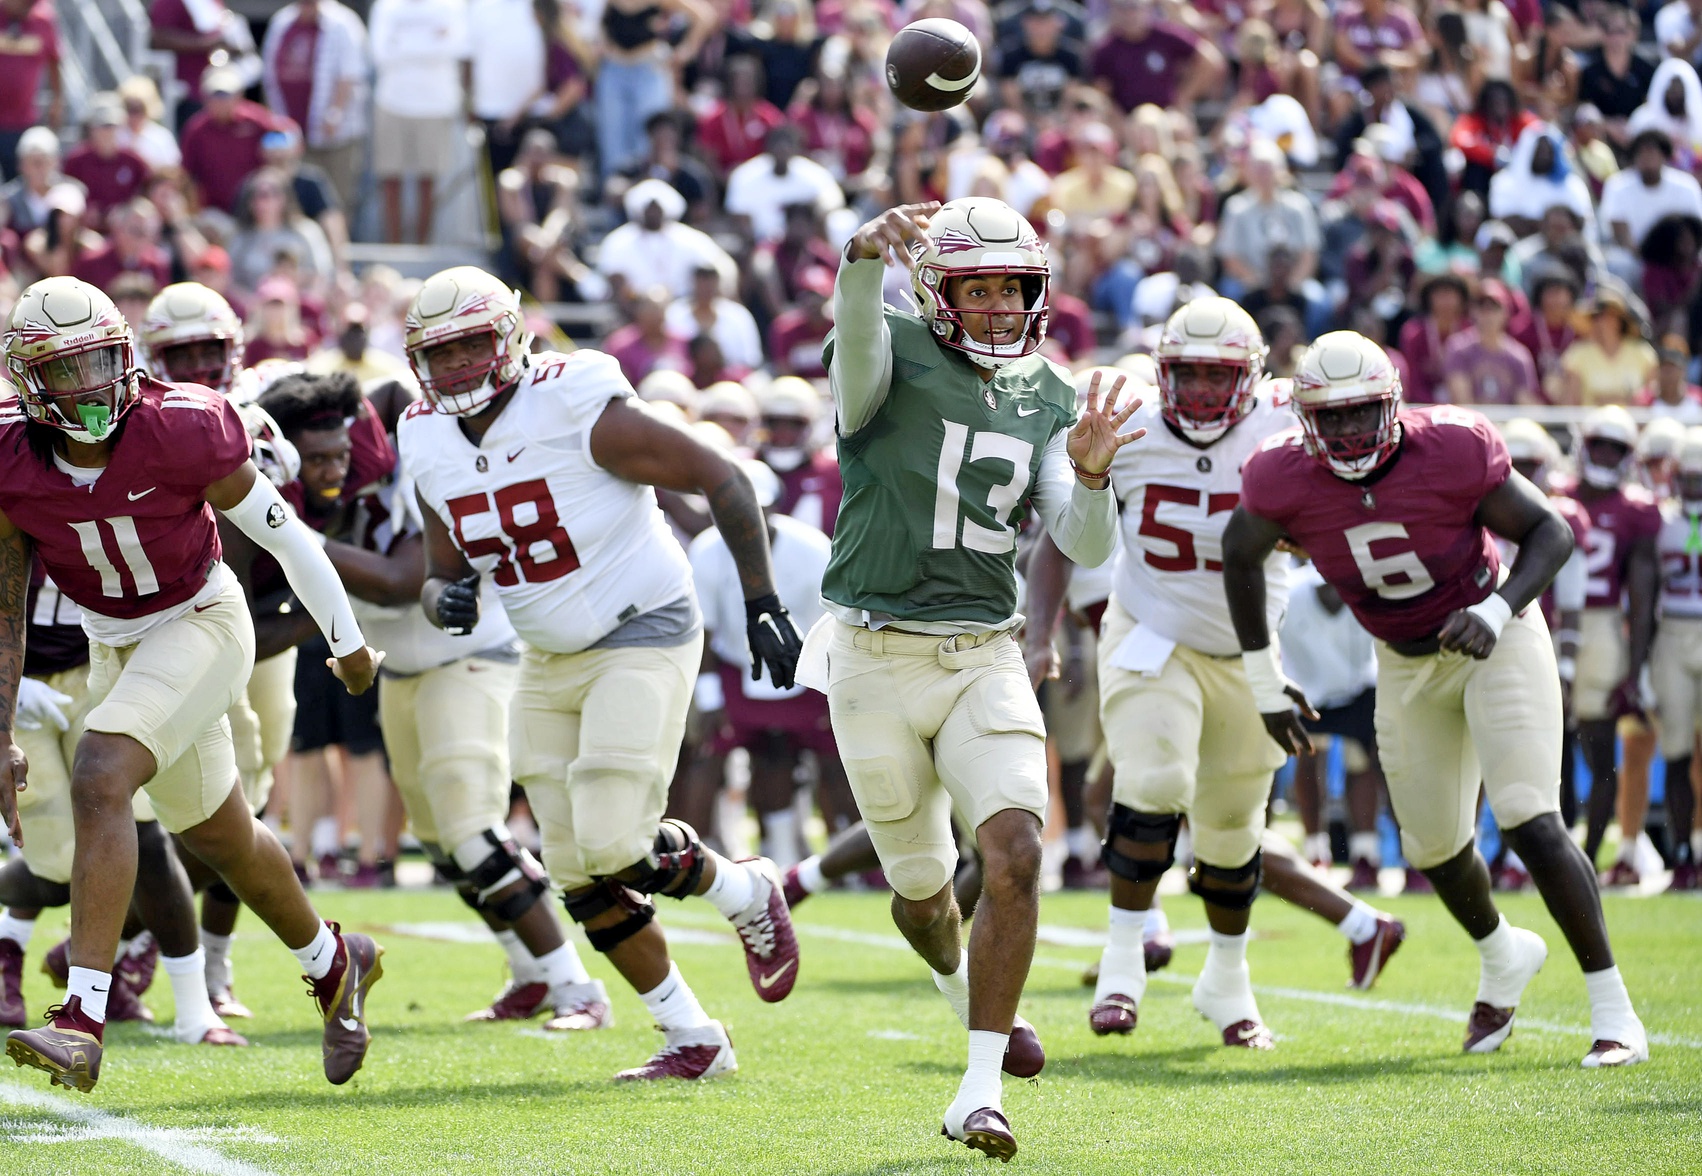 The 2023 FSU Spring Game previewed the deep and talented Seminoles for the upcoming season, as the 'Noles chase their first Playoff berth.